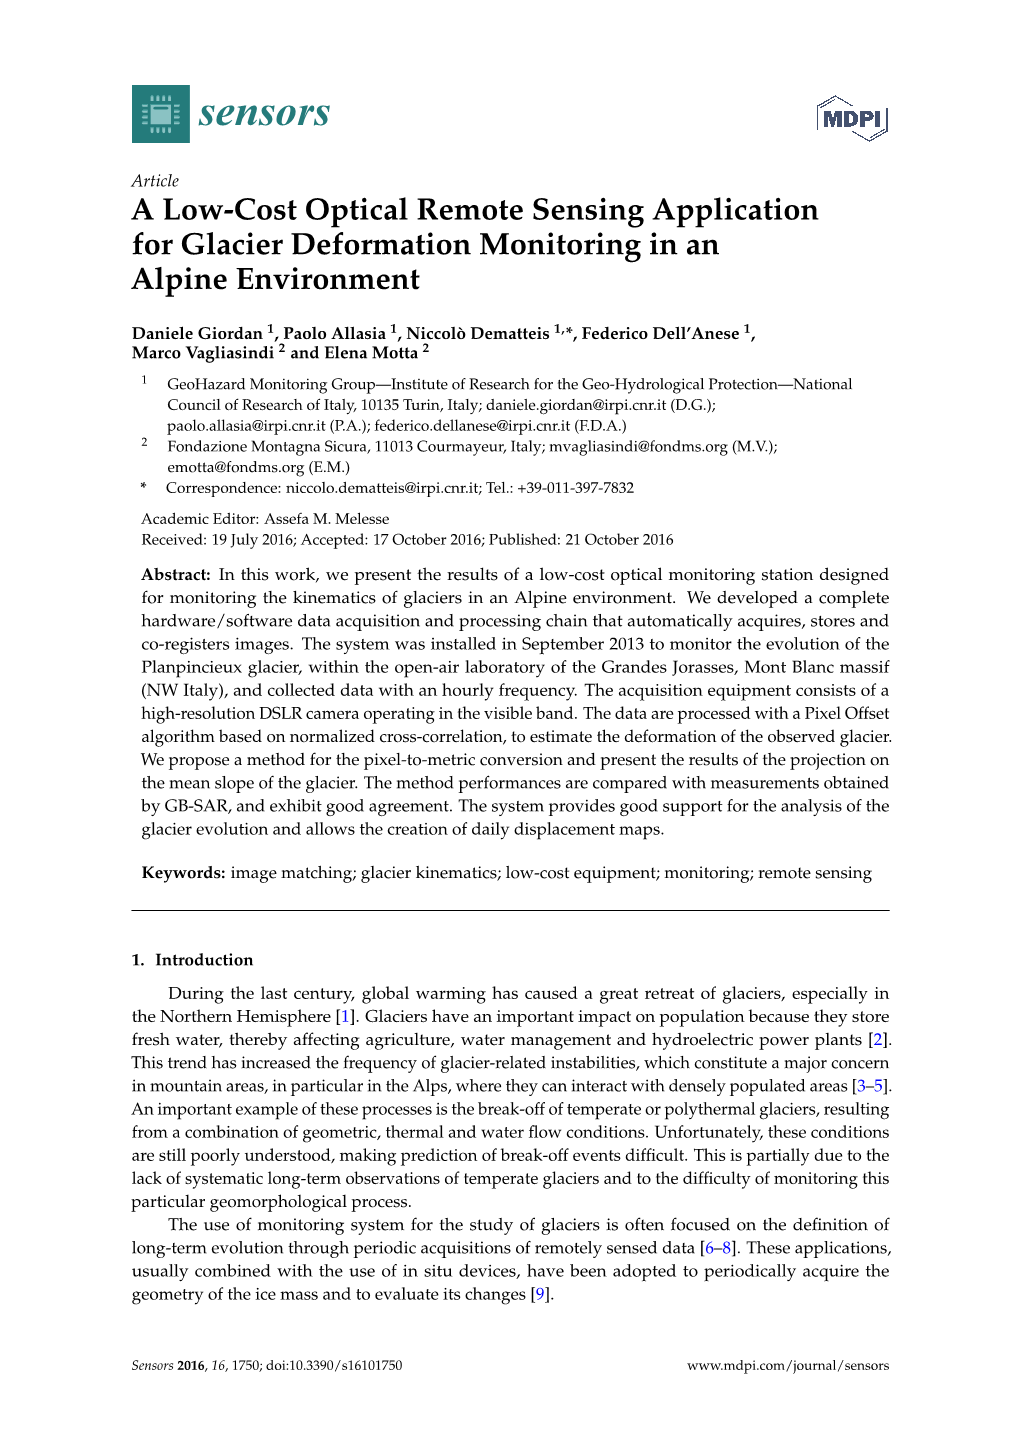 A Low-Cost Optical Remote Sensing Application for Glacier Deformation Monitoring in an Alpine Environment